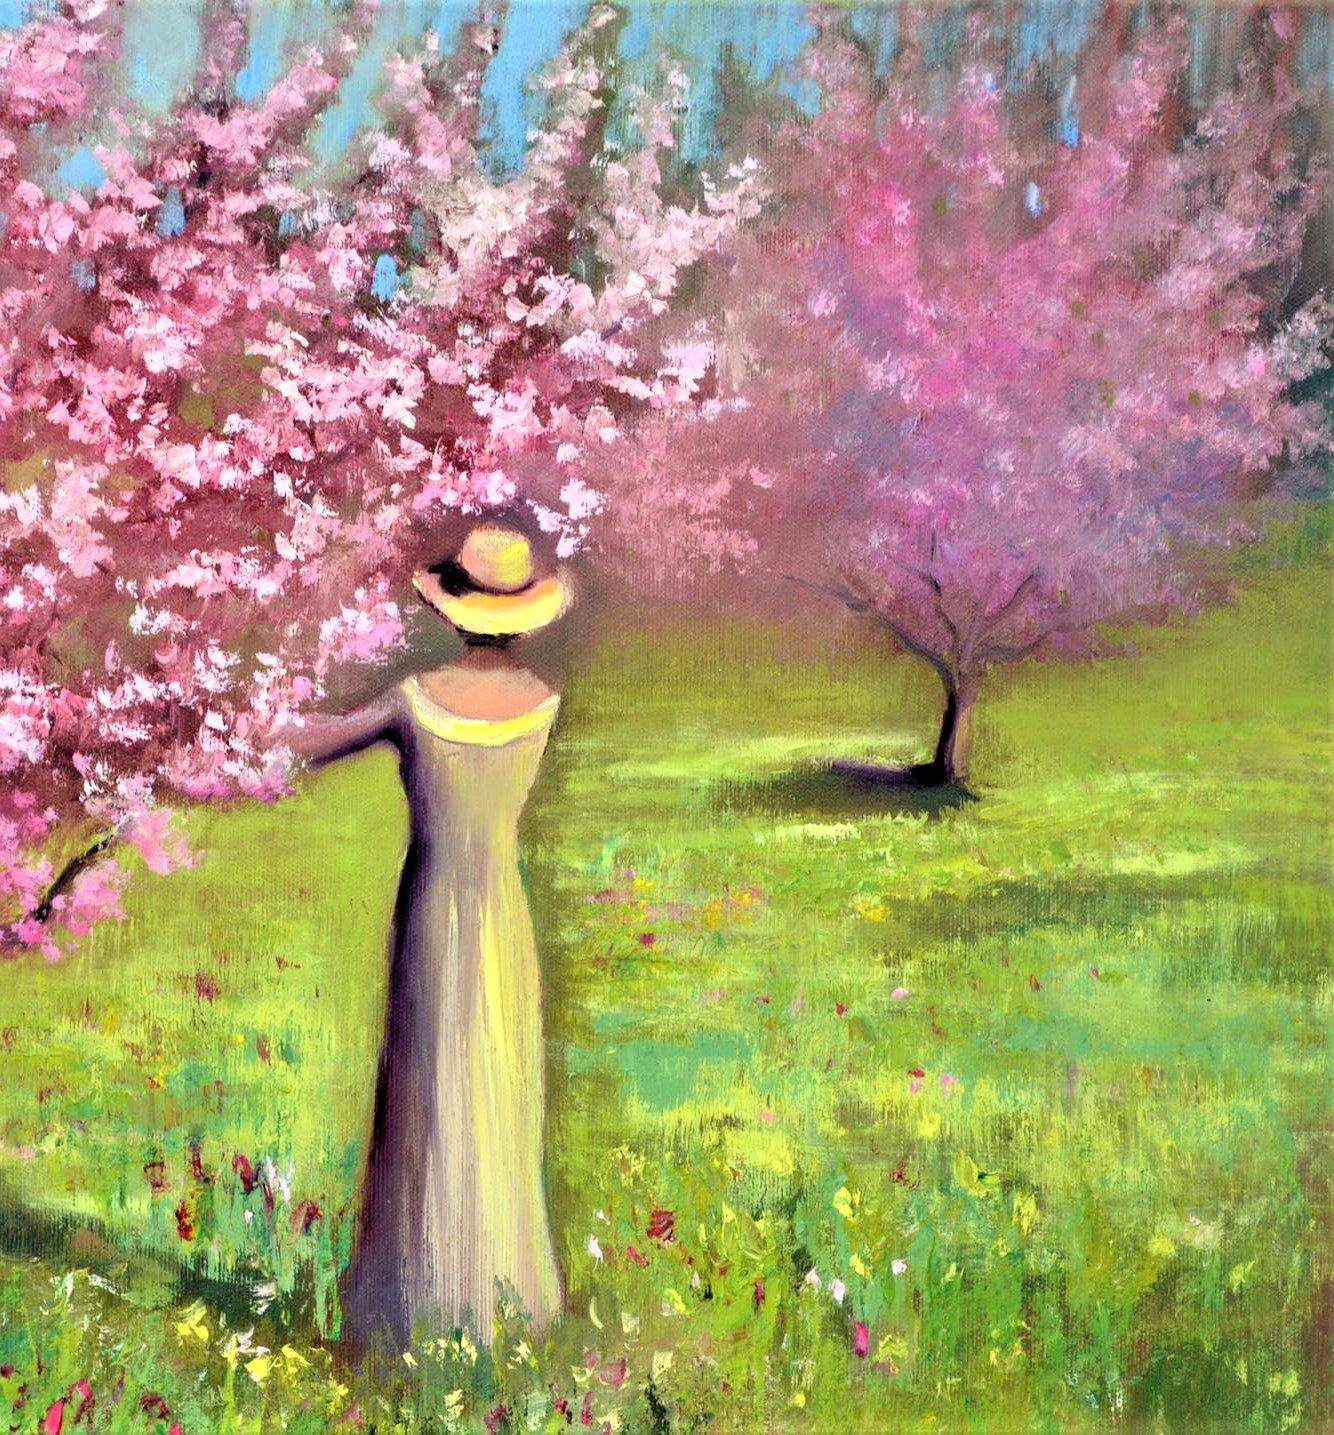 Сherry orchard - Painting by Elena Lukina